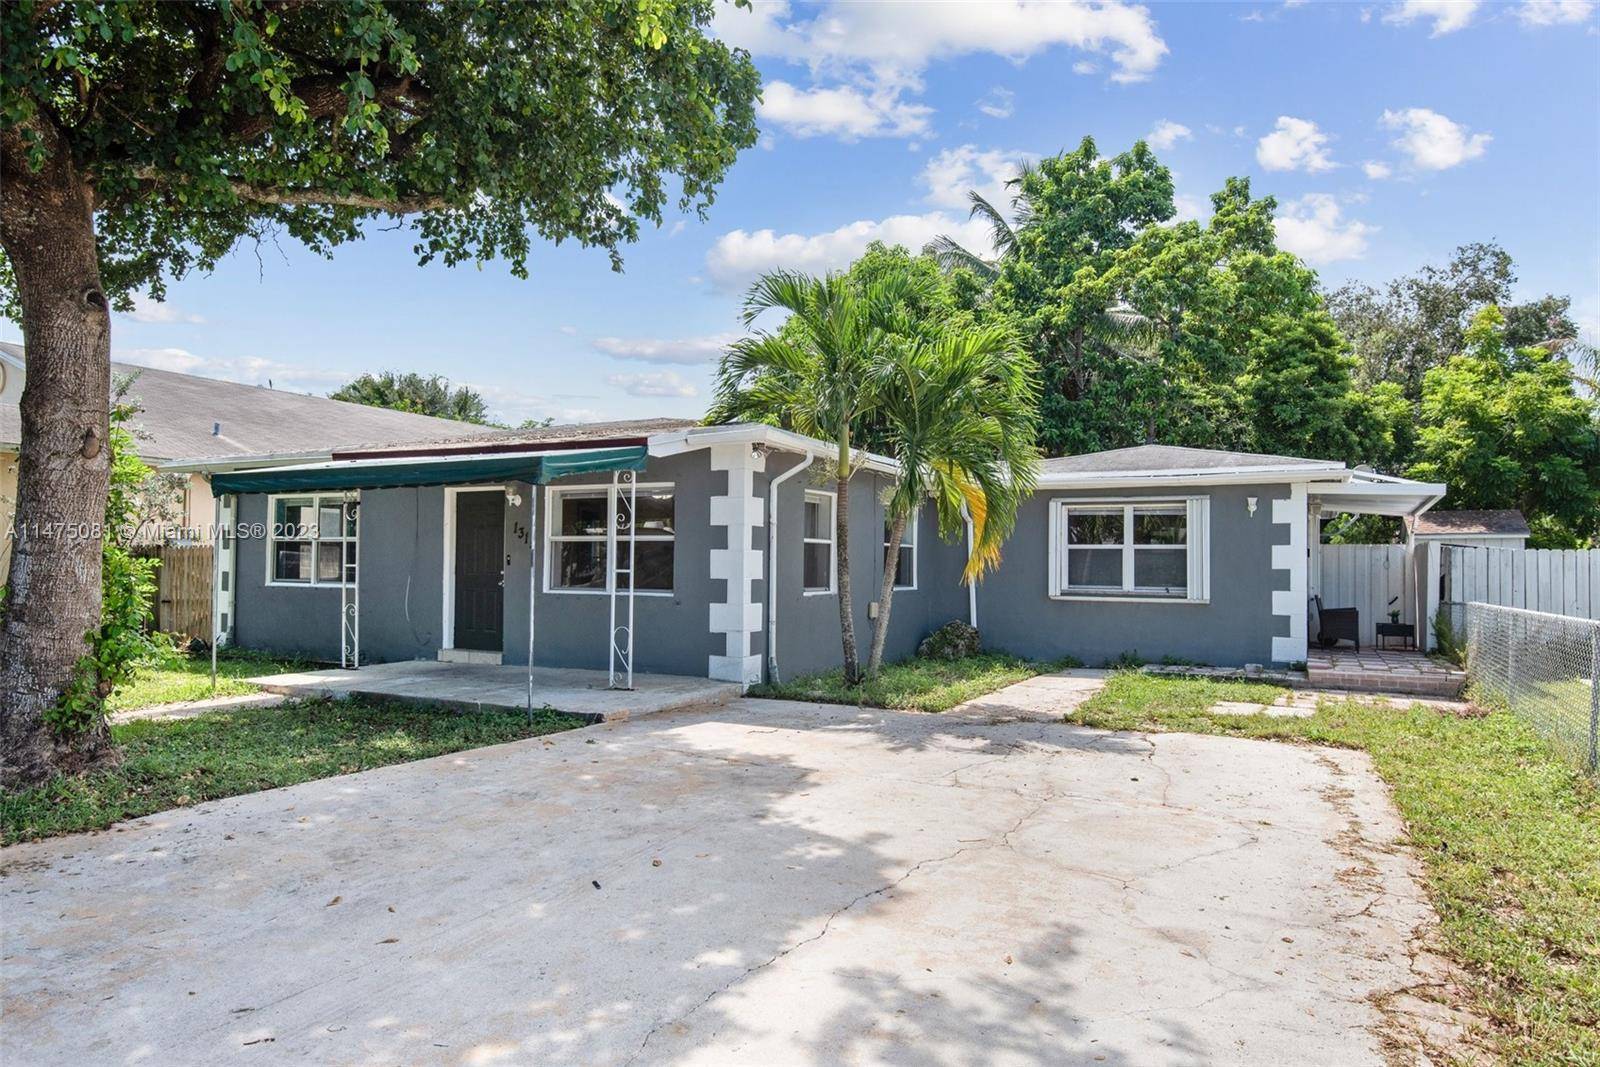 Welcome to 1315 Sw 22nd. The perfect single family home for a multi generational family.